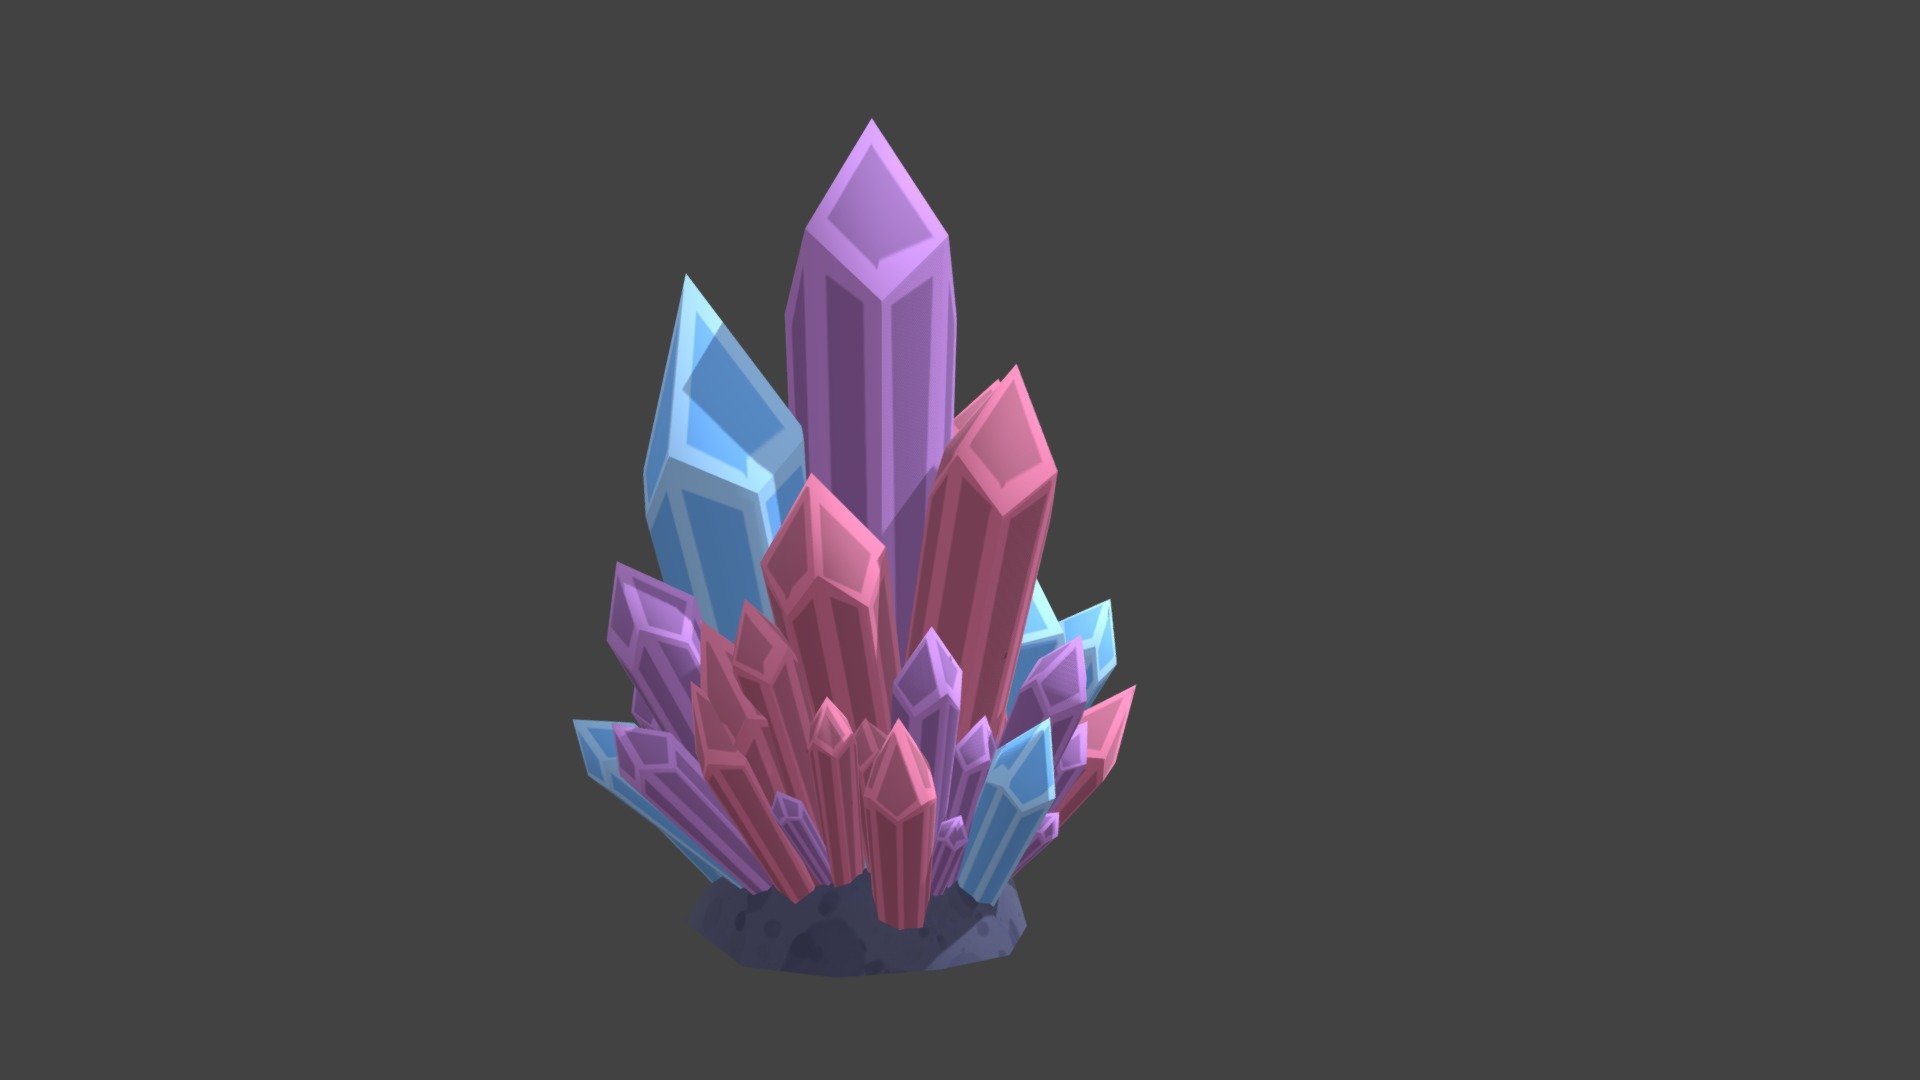 Crystal, part of a collection of other assets previously used in a game prototype. Modelled in Maya 3d model